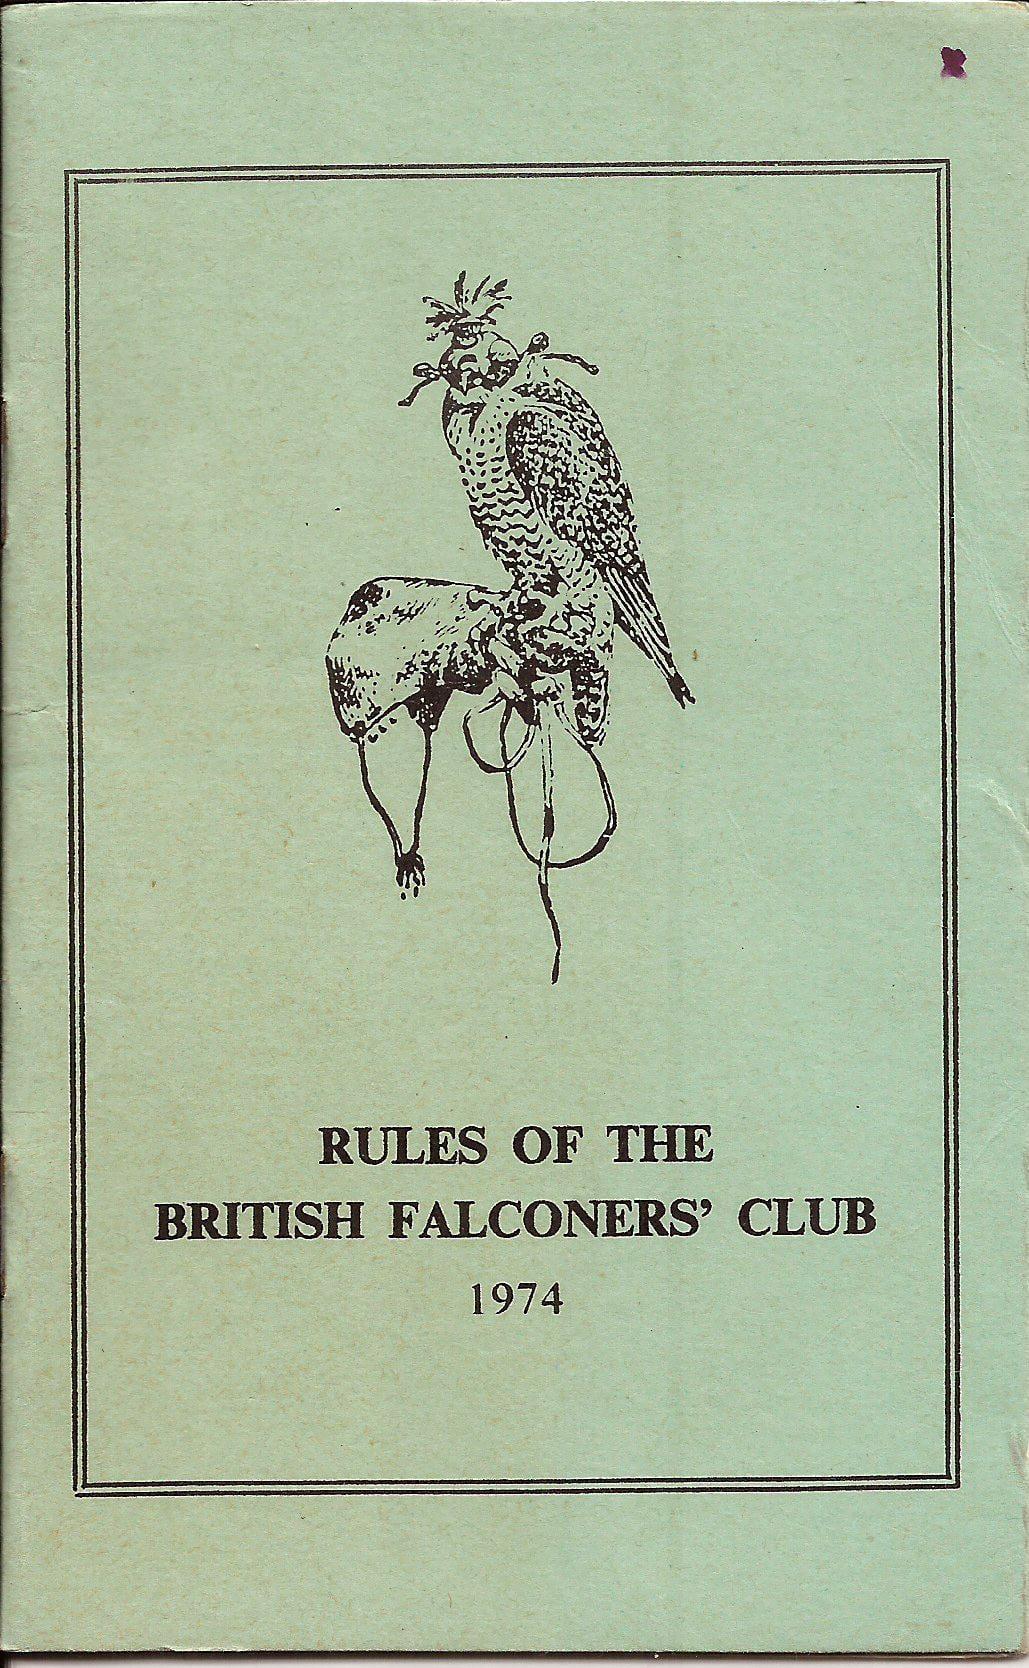 Rules of the British Falconers Club of 1974 - from Frigues Bagyai